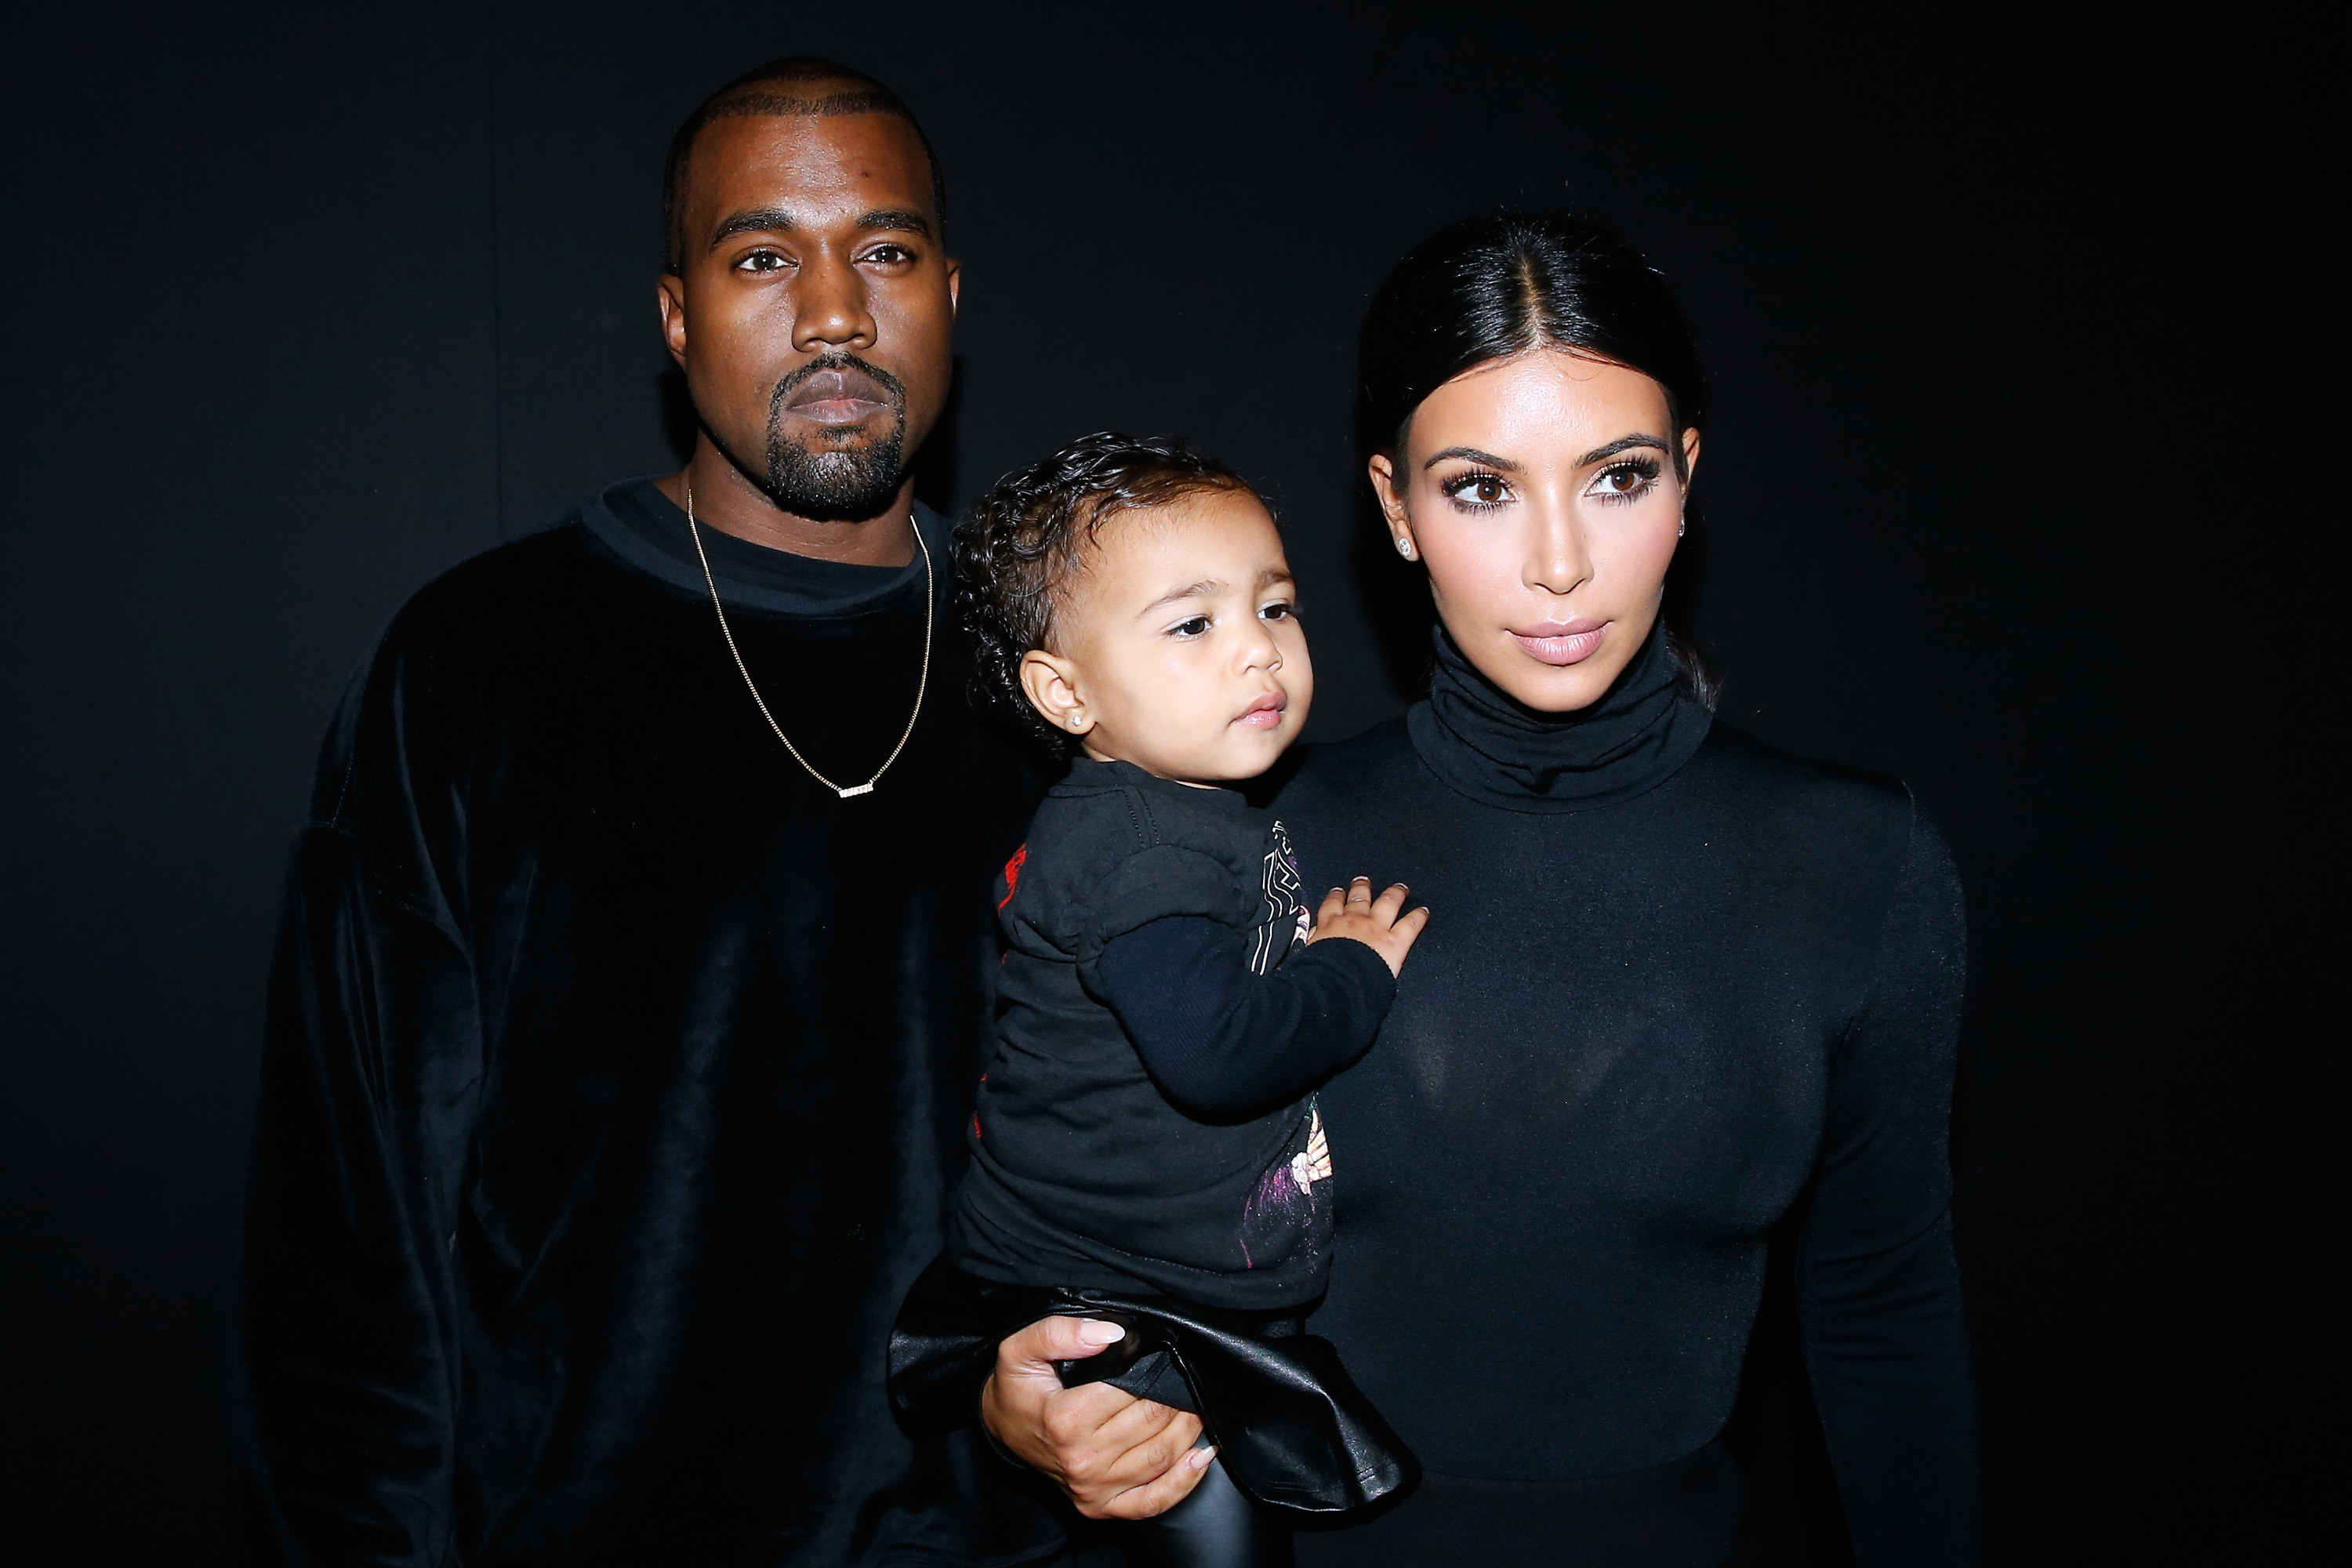 Why Is Kim Kardashian Famous? This Is How She Explained It To North West